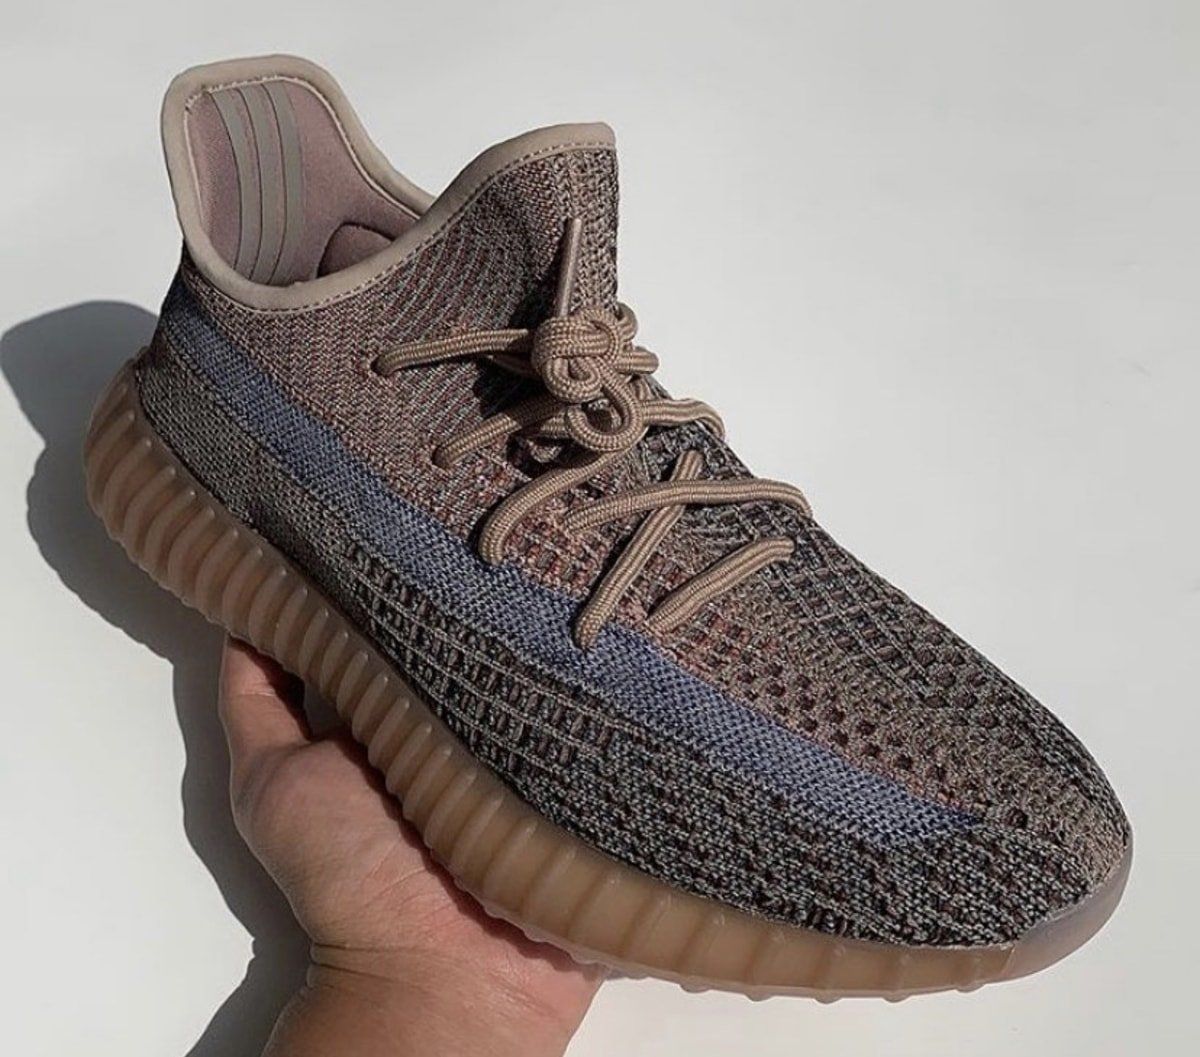 yeezy 350 first release